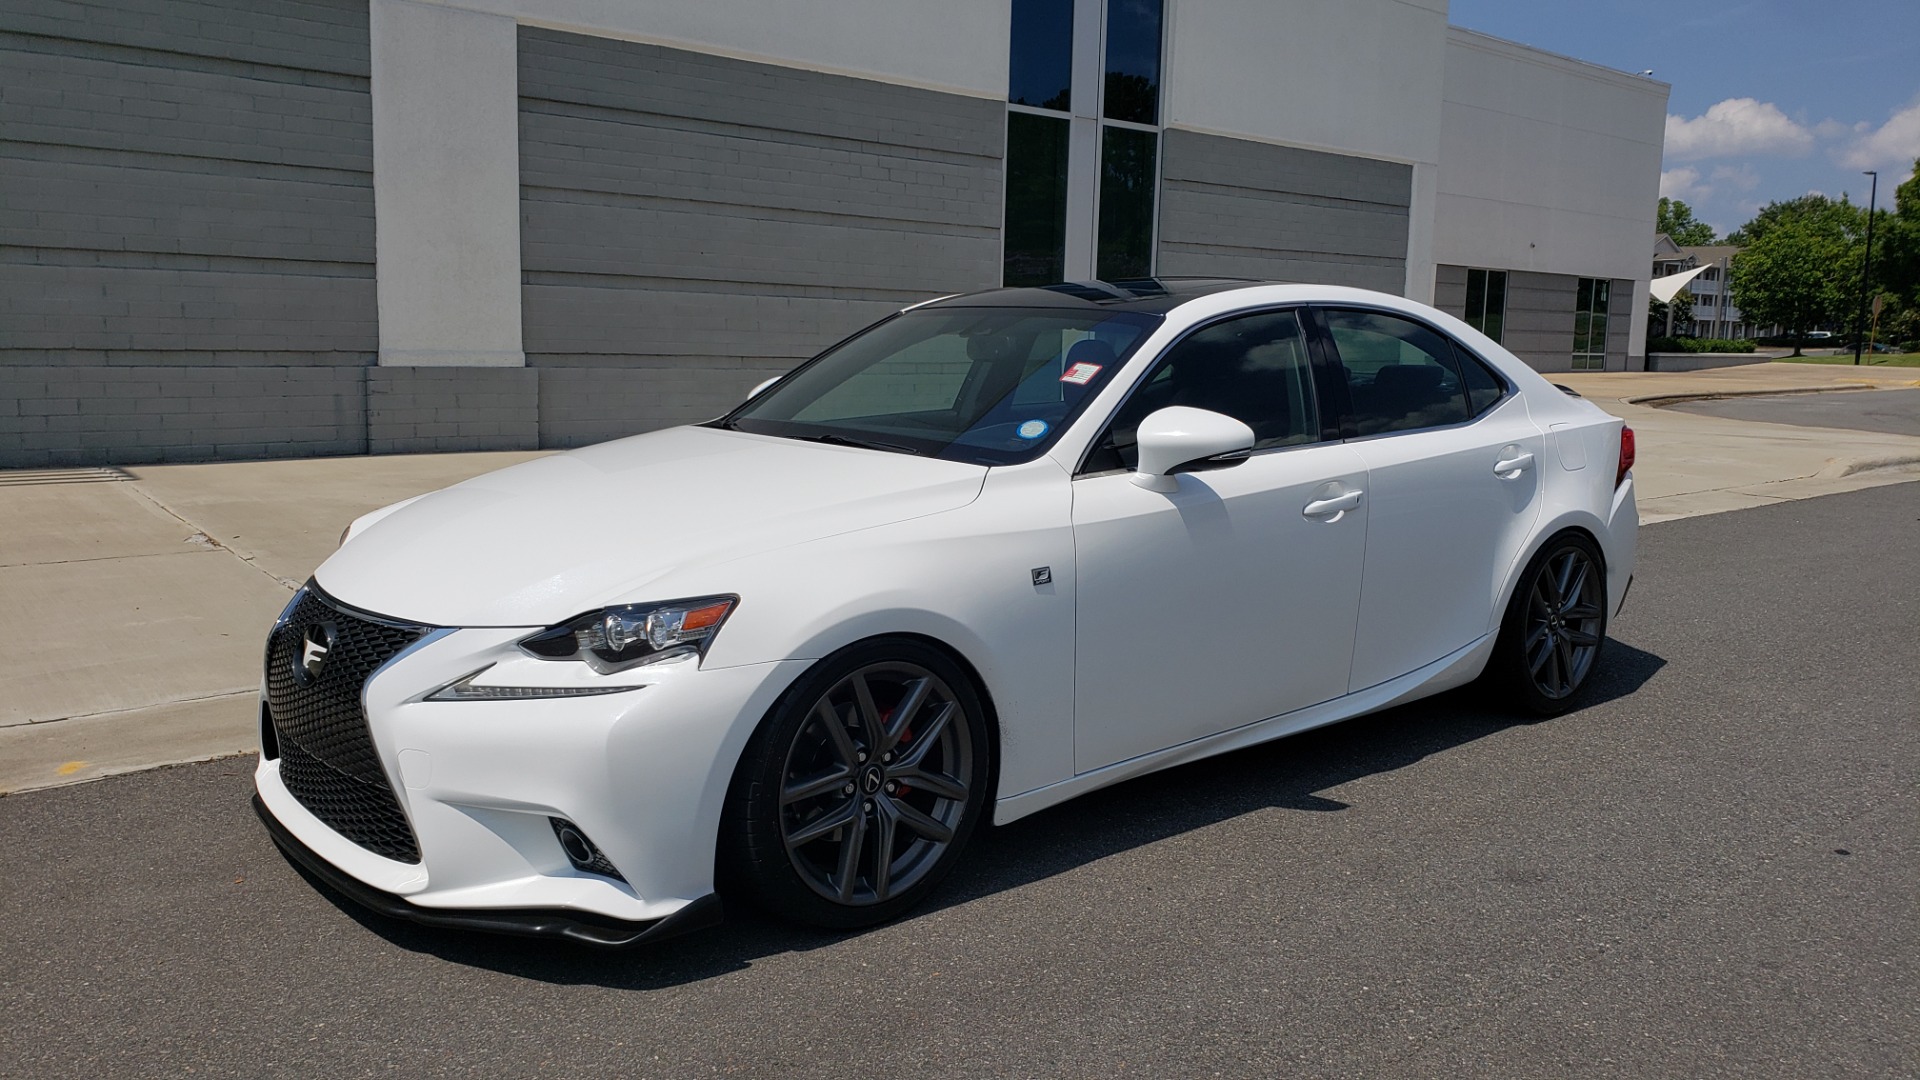 Used 2014 Lexus IS 250 F-SPORT SEDAN / BLIND SPOT MONITOR / REARVIEW / 18IN WHEELS for sale Sold at Formula Imports in Charlotte NC 28227 5